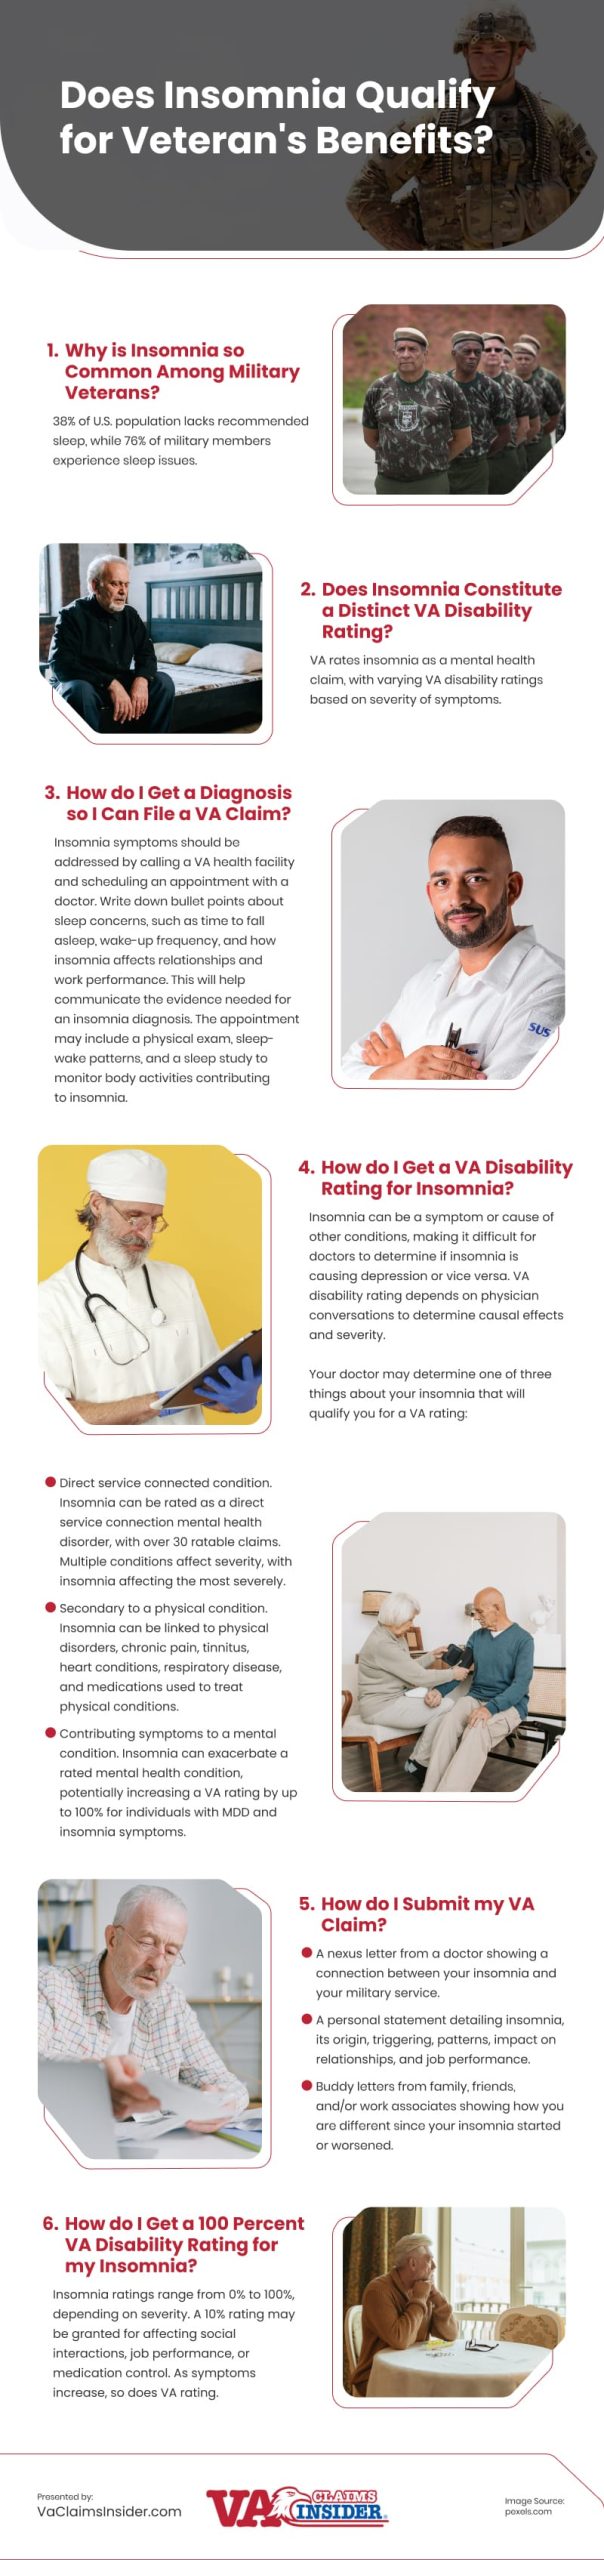 Does Insomnia Qualify for Veteran’s Benefits Infographic